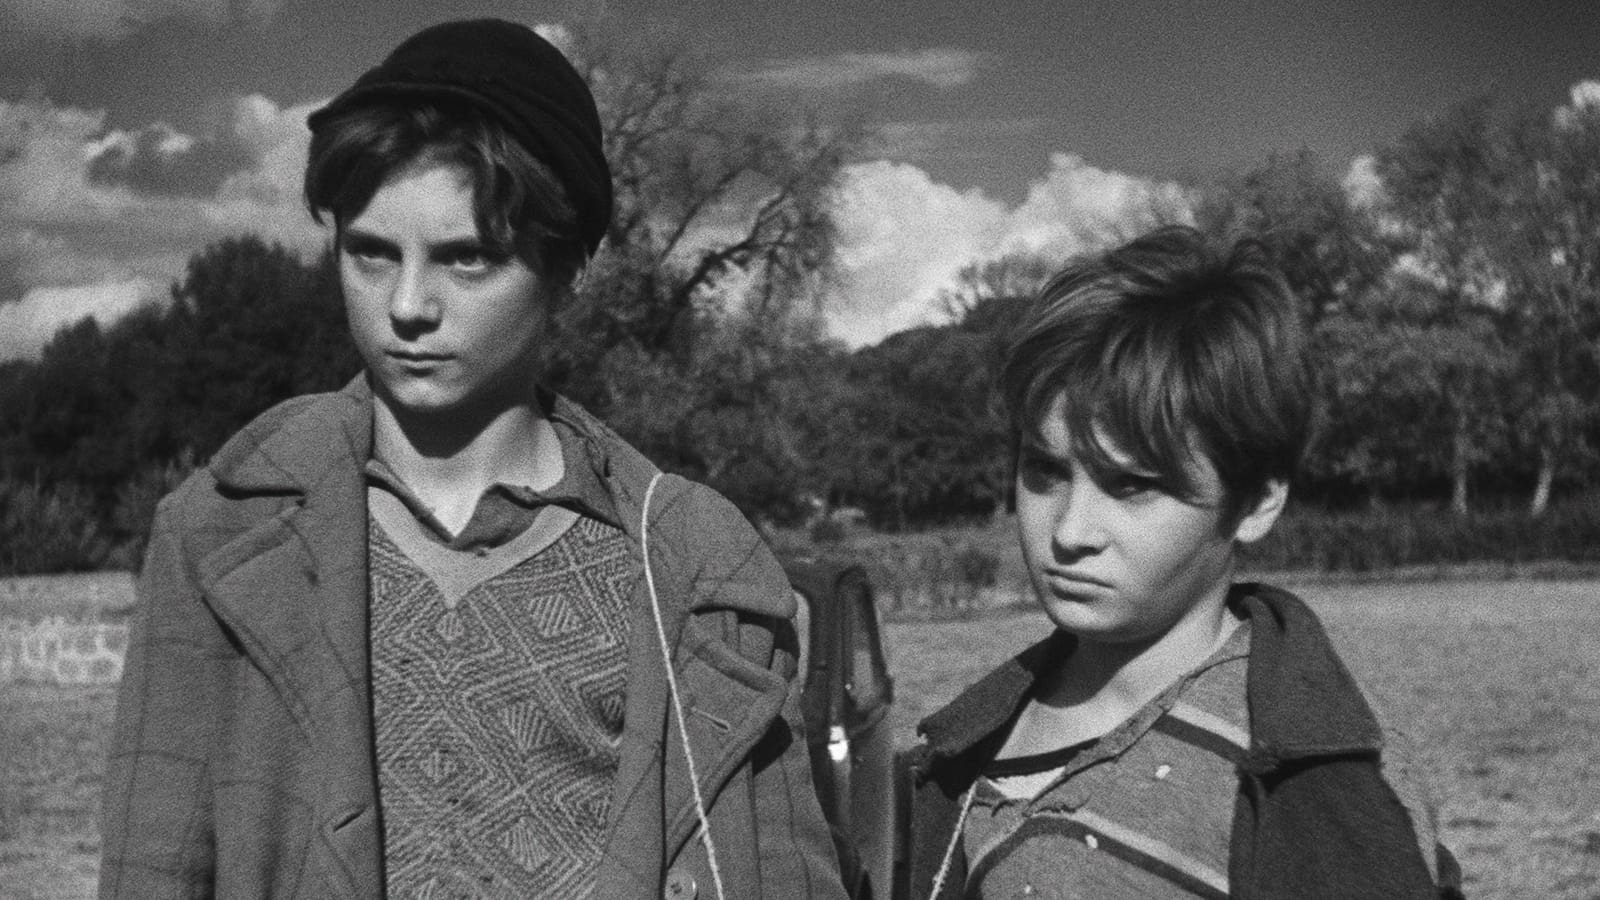 Black and white still from Shoeshine depicting two boys standing side by side.